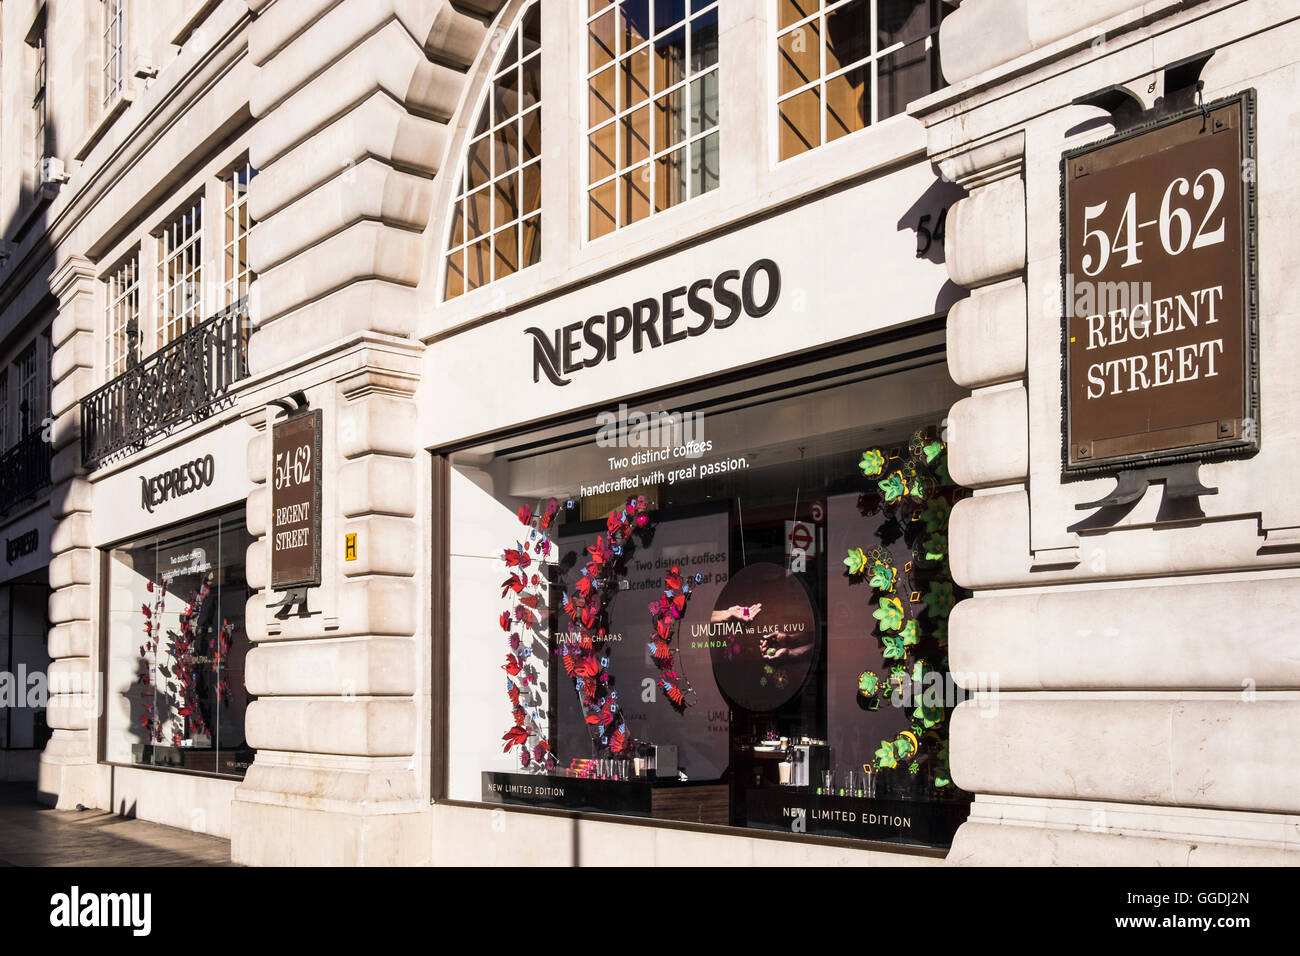 Nespresso Store Regent Street High Resolution Stock Photography and Images  - Alamy